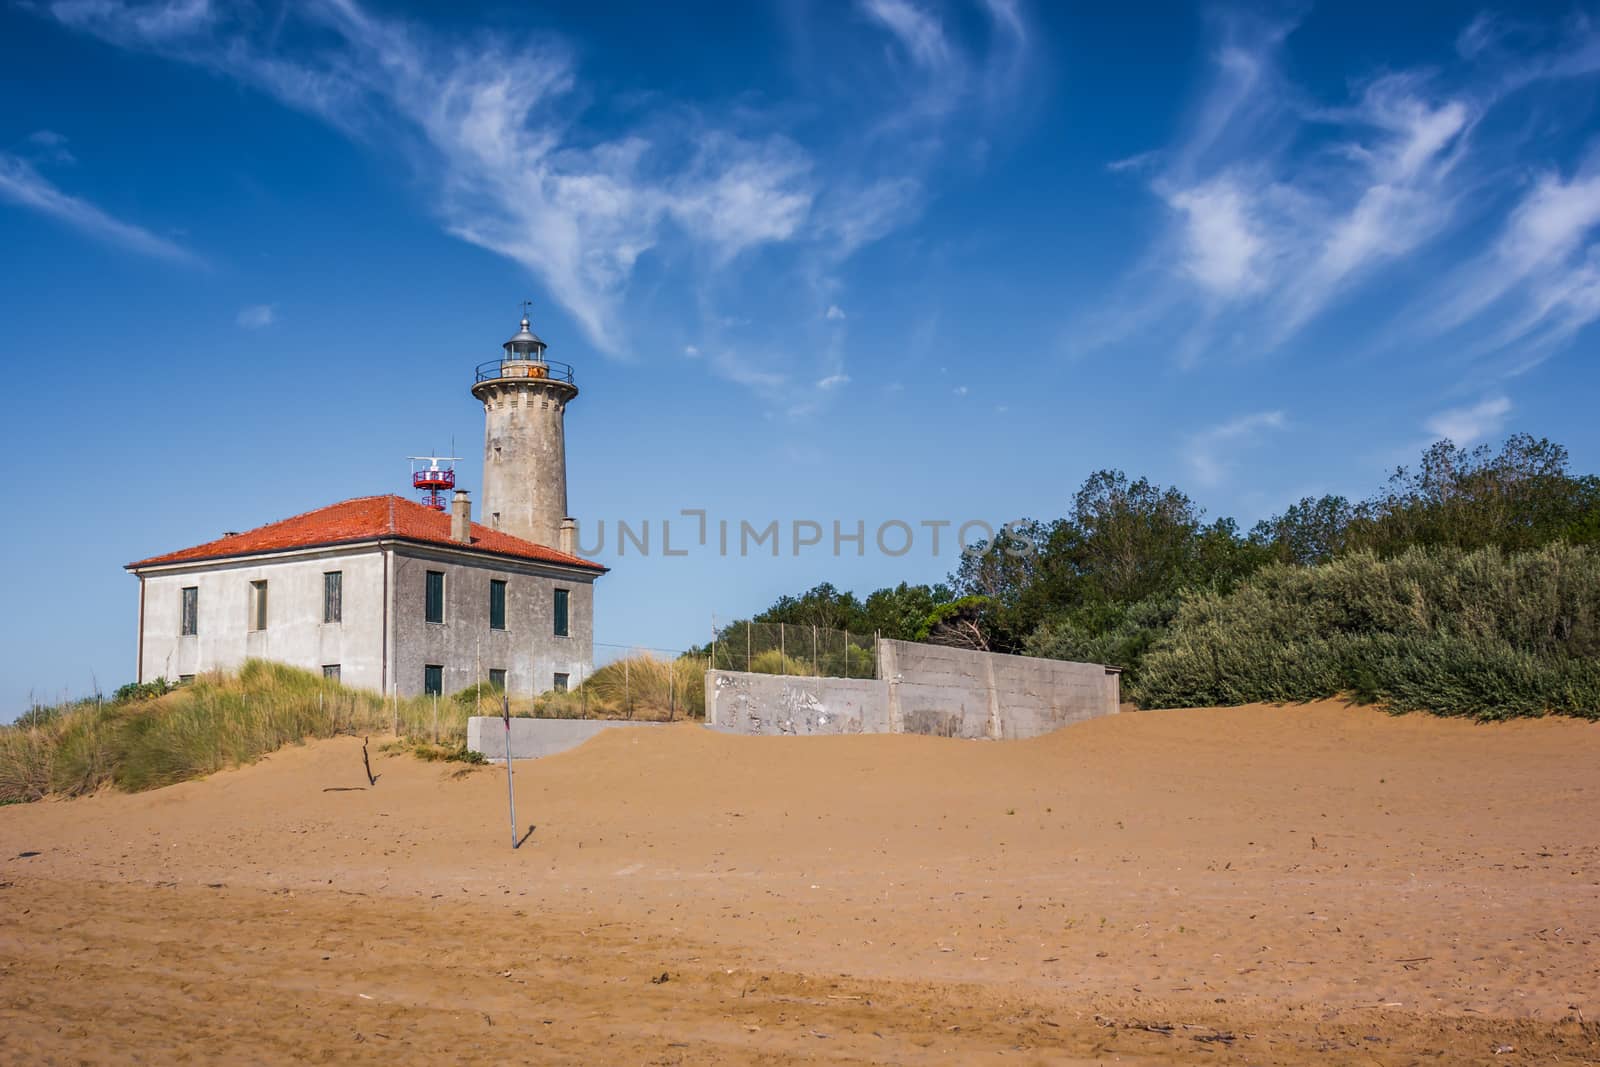 The lighthouse on the beach at the mouth of the river Tagliamento, Bibione, Venezia, Italy.